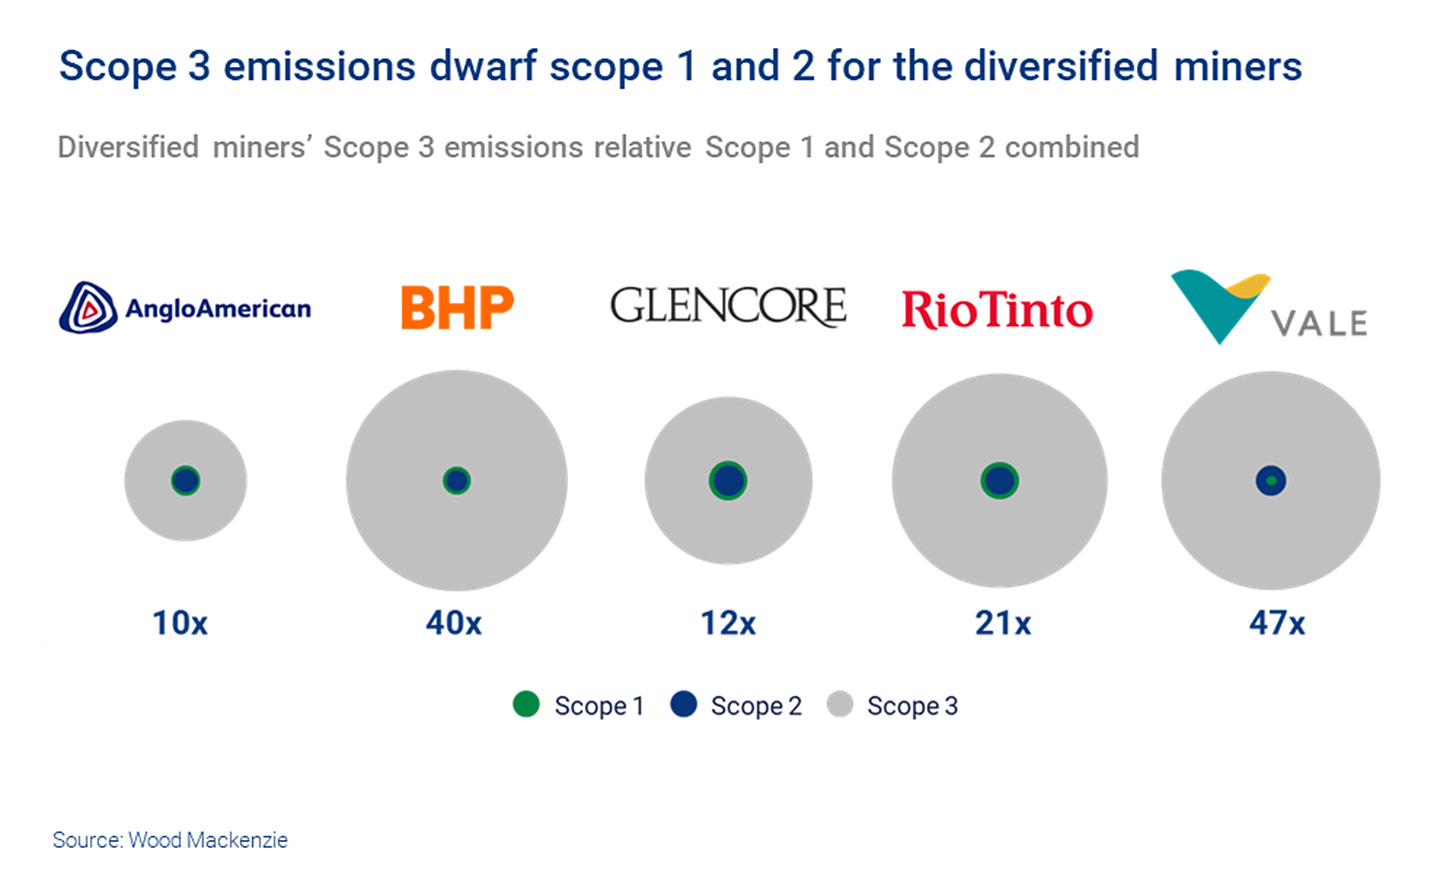 Chart shows miners' scope 3 emissions dwarf scope 1 and 2 